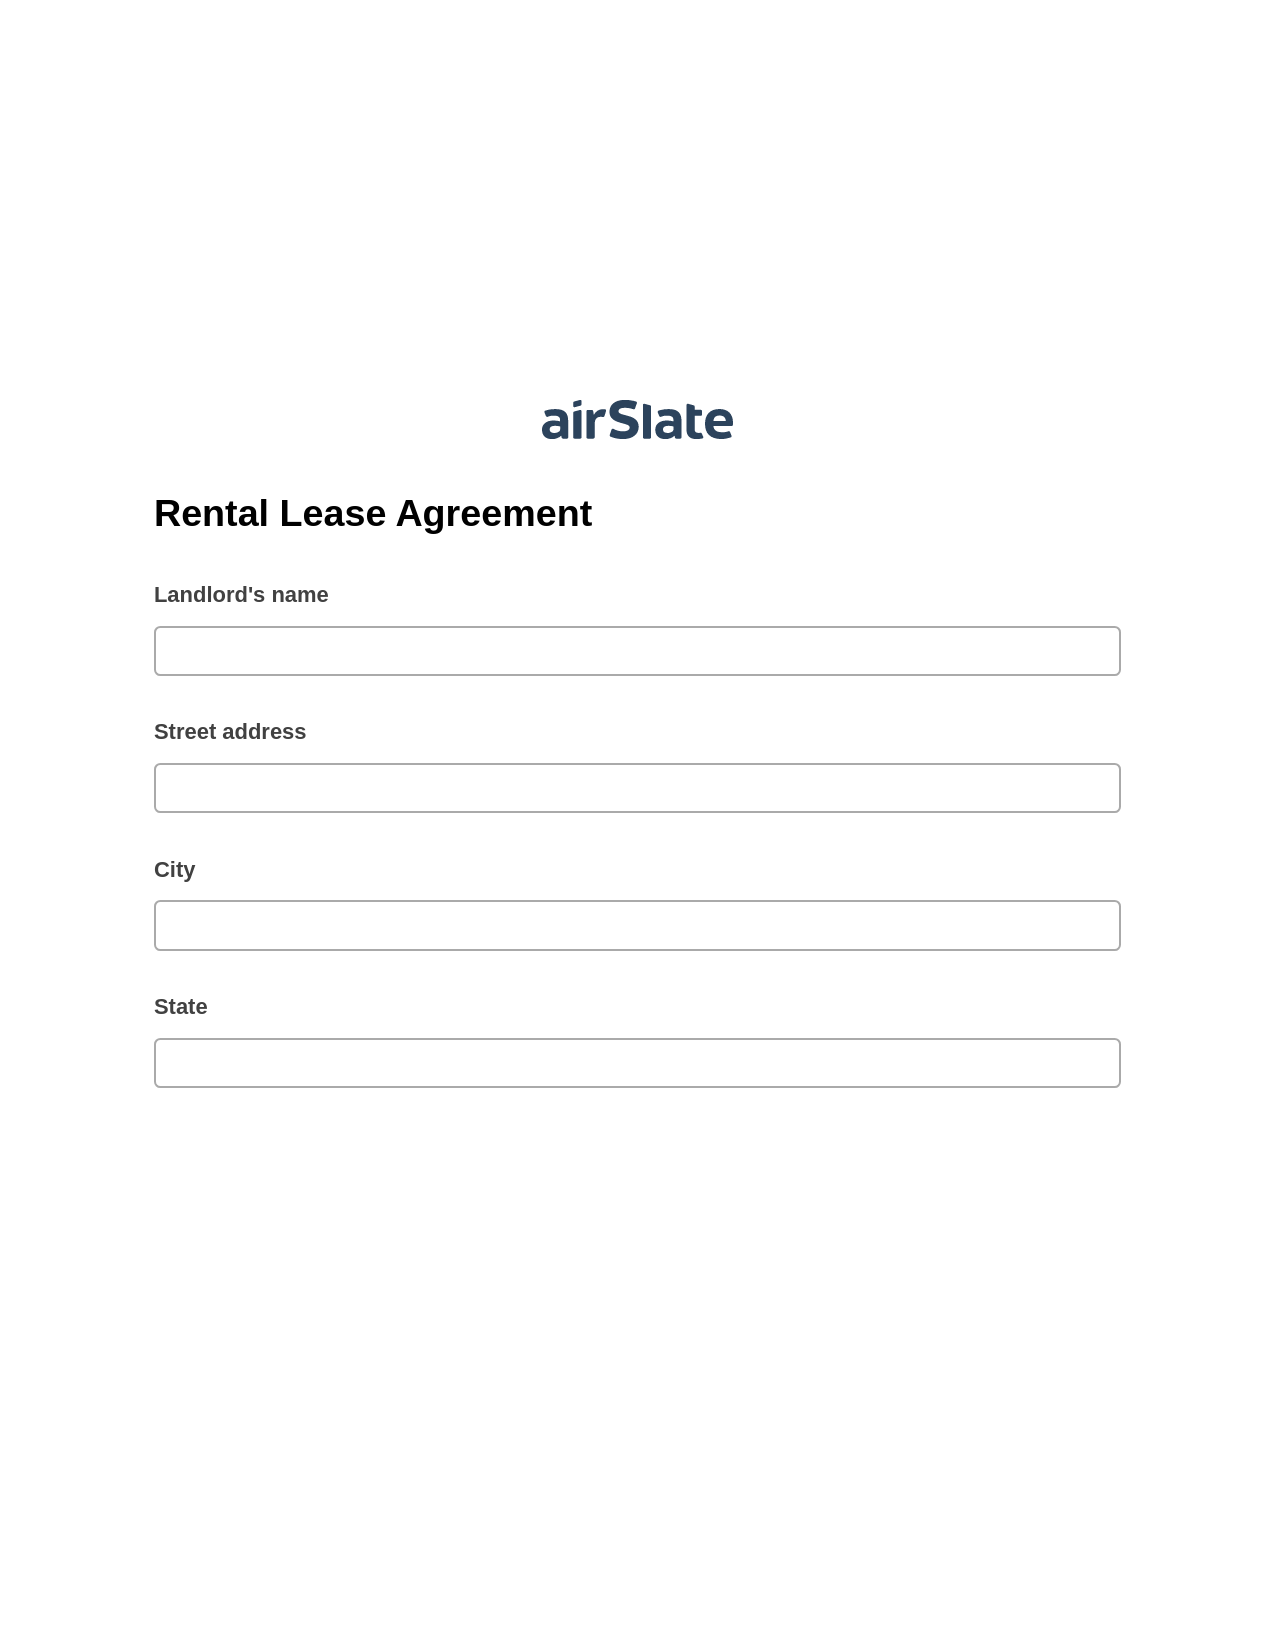 Multirole Rental Lease Agreement Pre-fill from Google Sheet Dropdown Options Bot, Invoke Salesforce Process Bot, Export to Excel 365 Bot